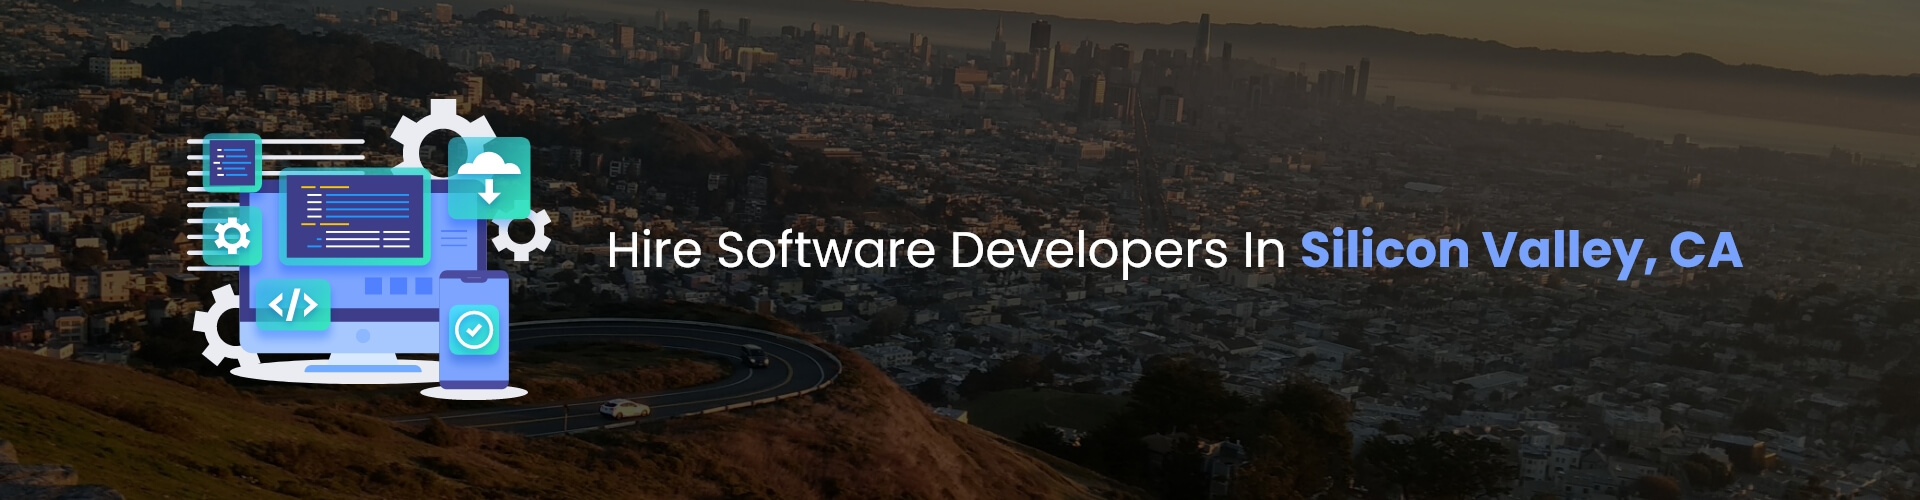 hire software developers in silicon valley, ca